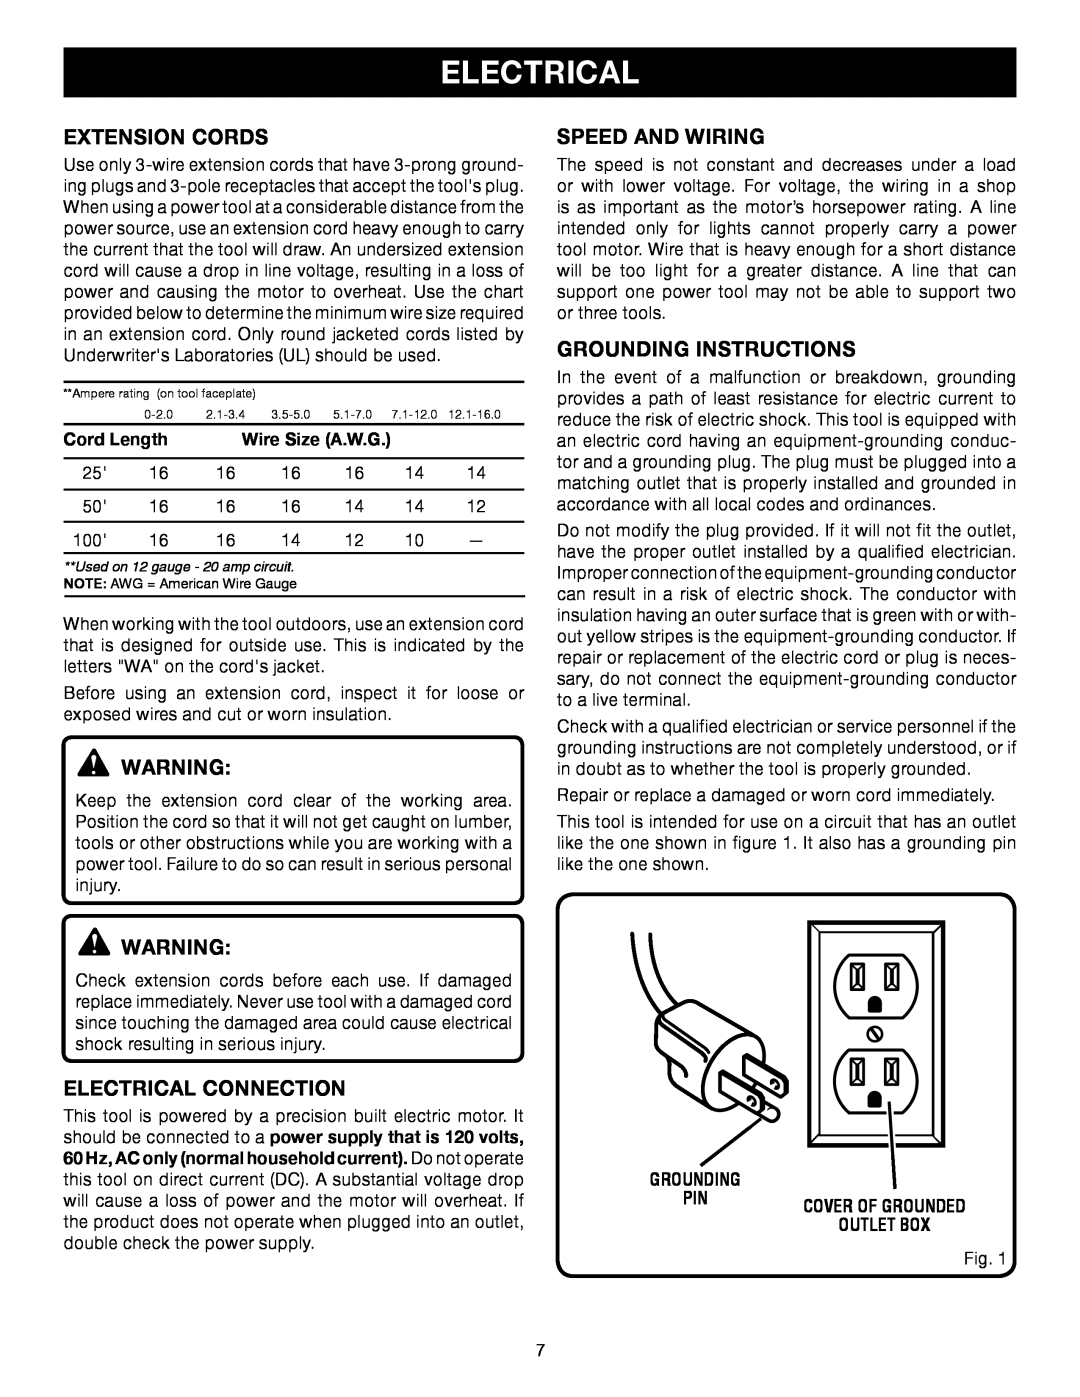 Ryobi Outdoor RY49701 manual Extension Cords, Speed And Wiring, Grounding Instructions, Electrical Connection 